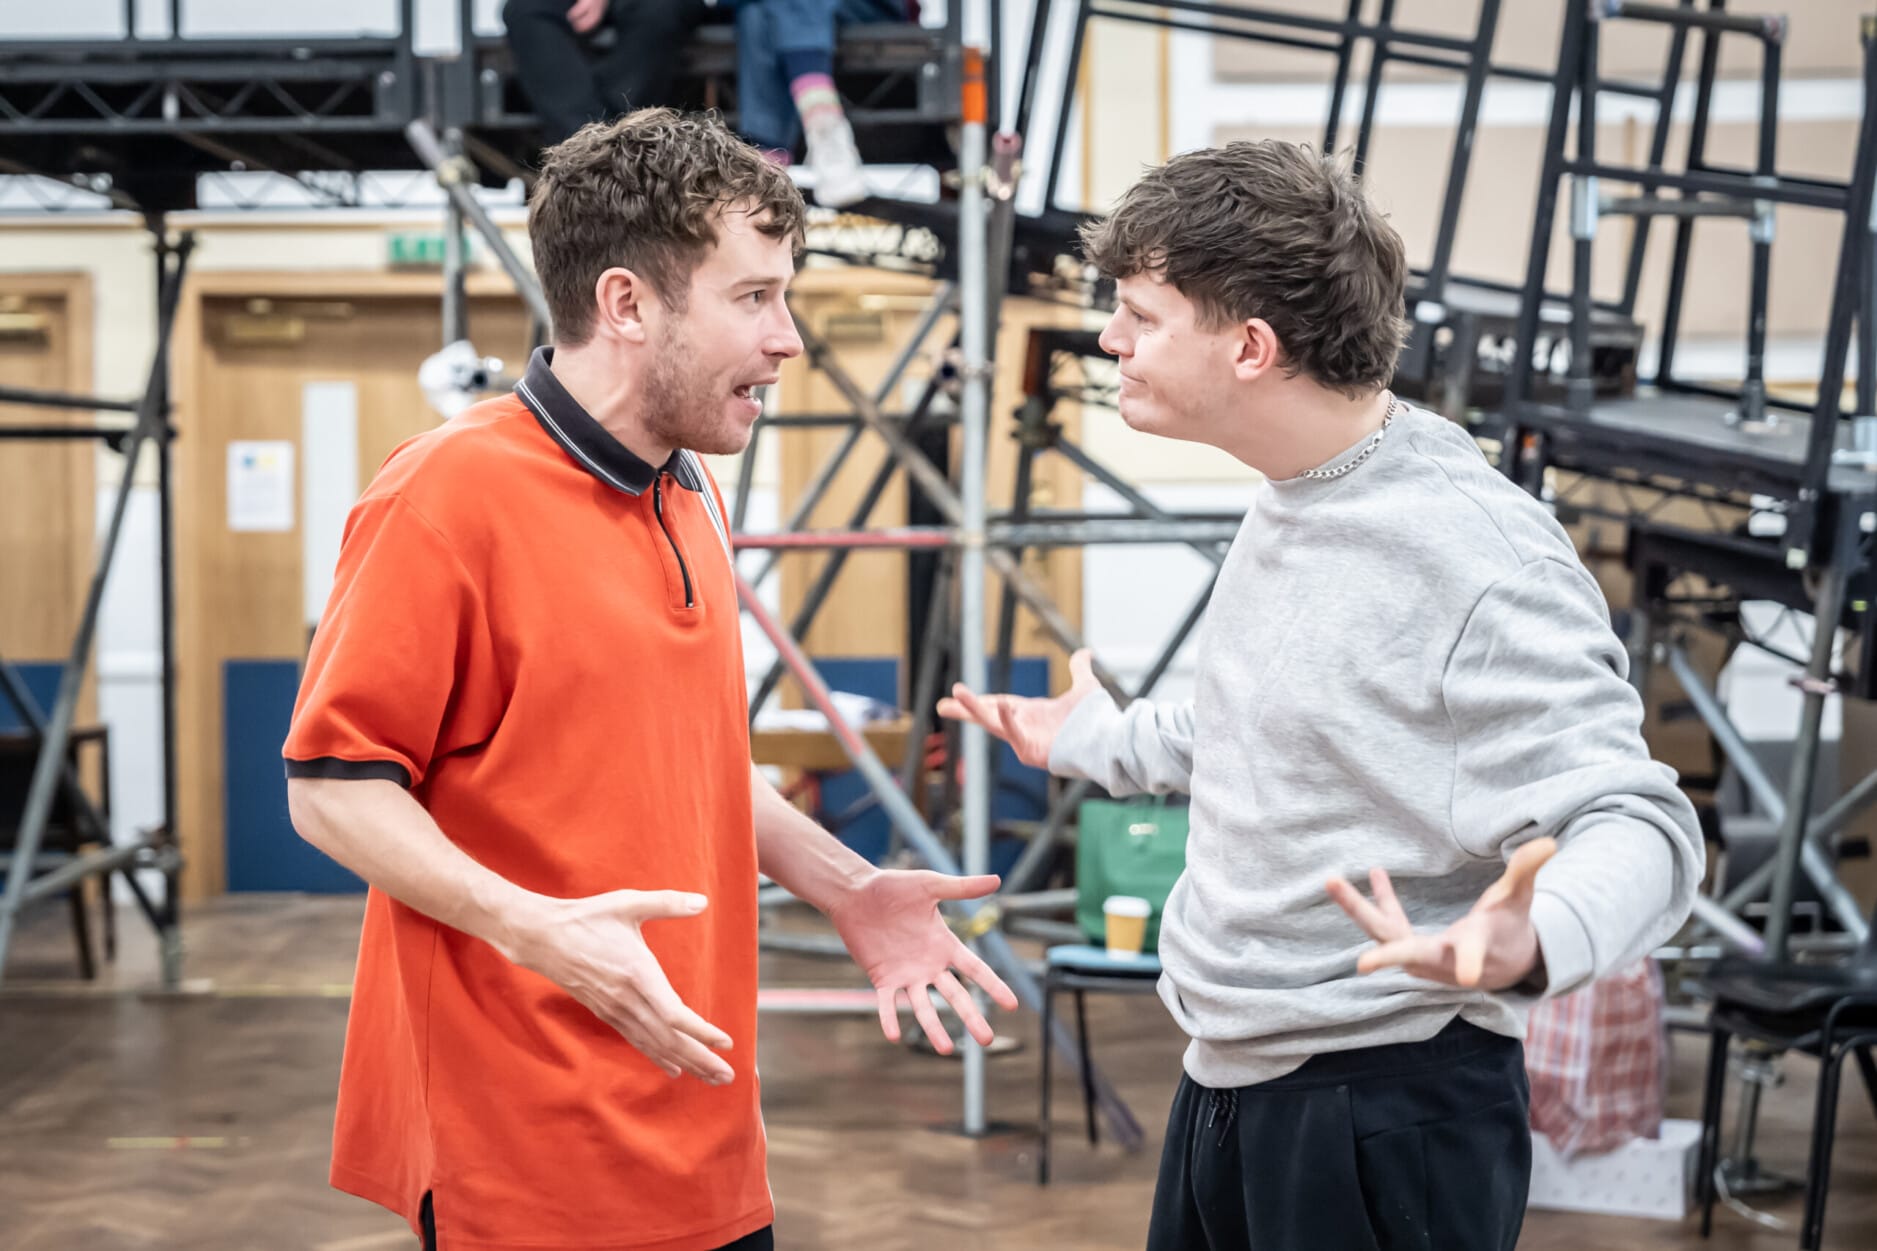 David Shields and Alec Boaden in rehearsal for Punch. Photo by Marc Brenner.